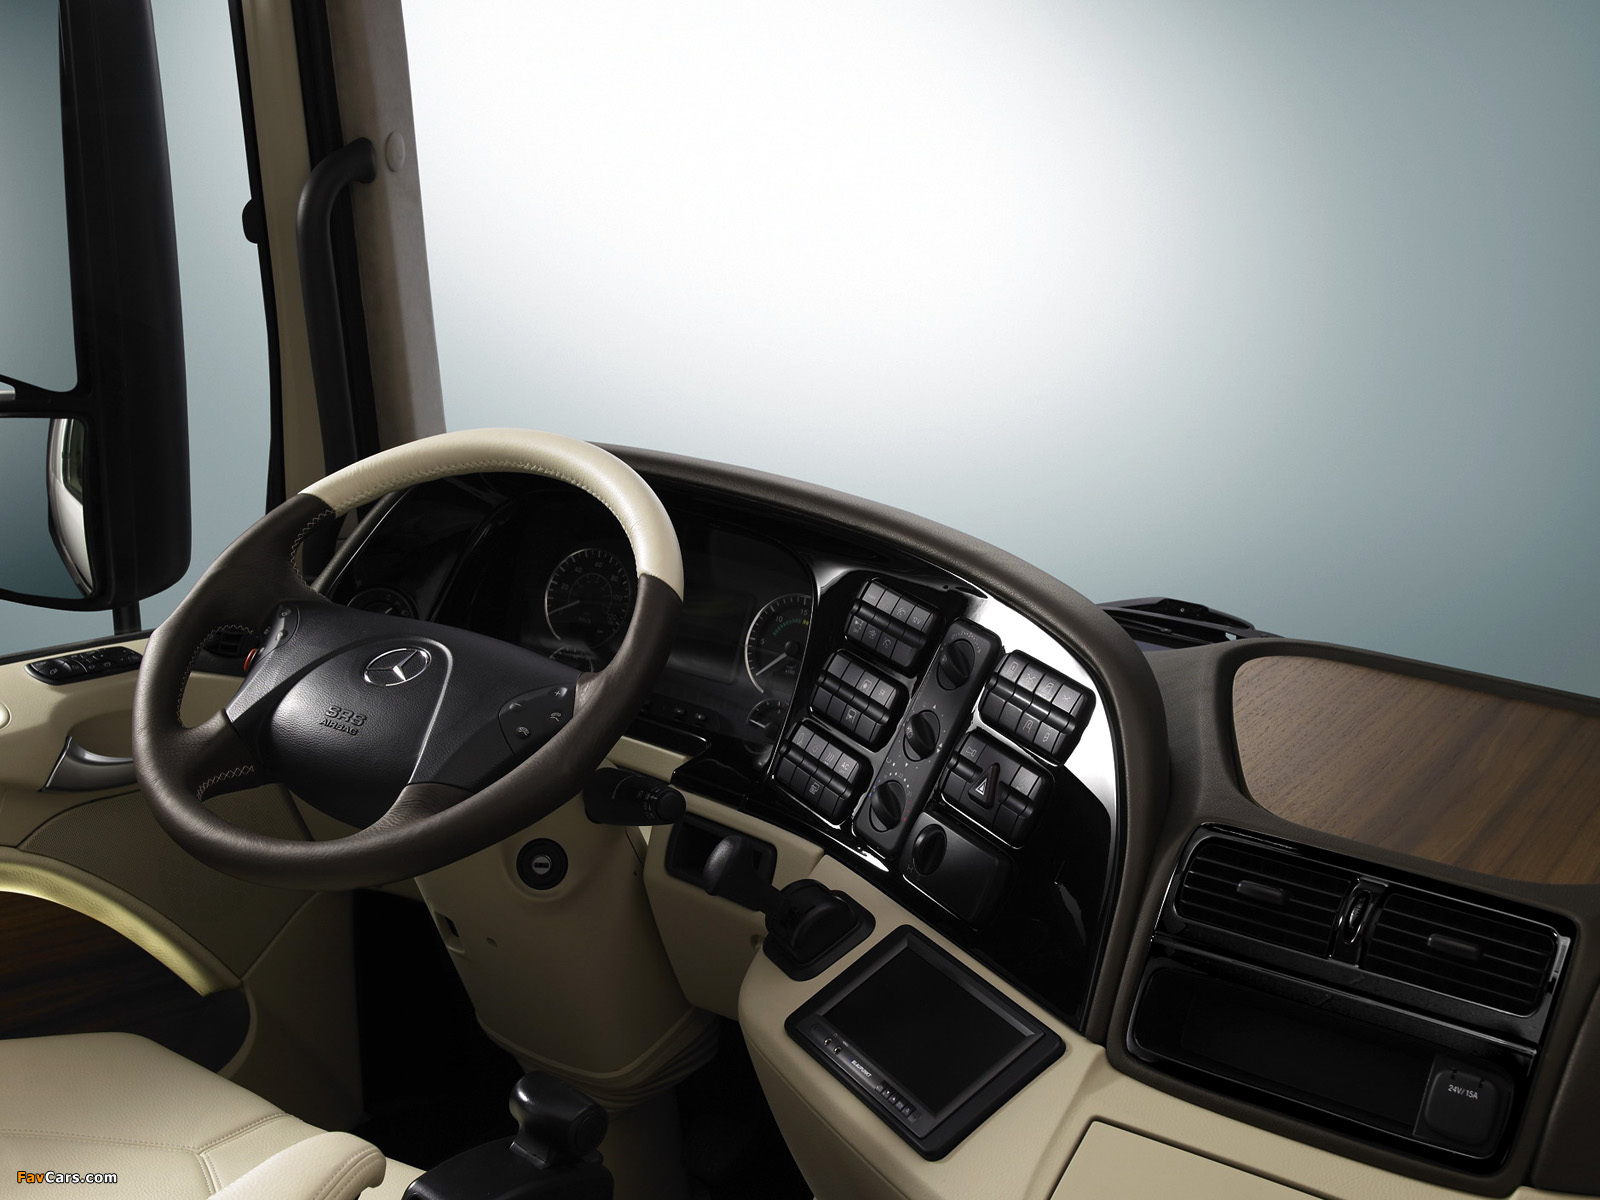 Mercedes-Benz Actros 1860 Study Space Max Concept (MP2) 2006 wallpapers (1600 x 1200)